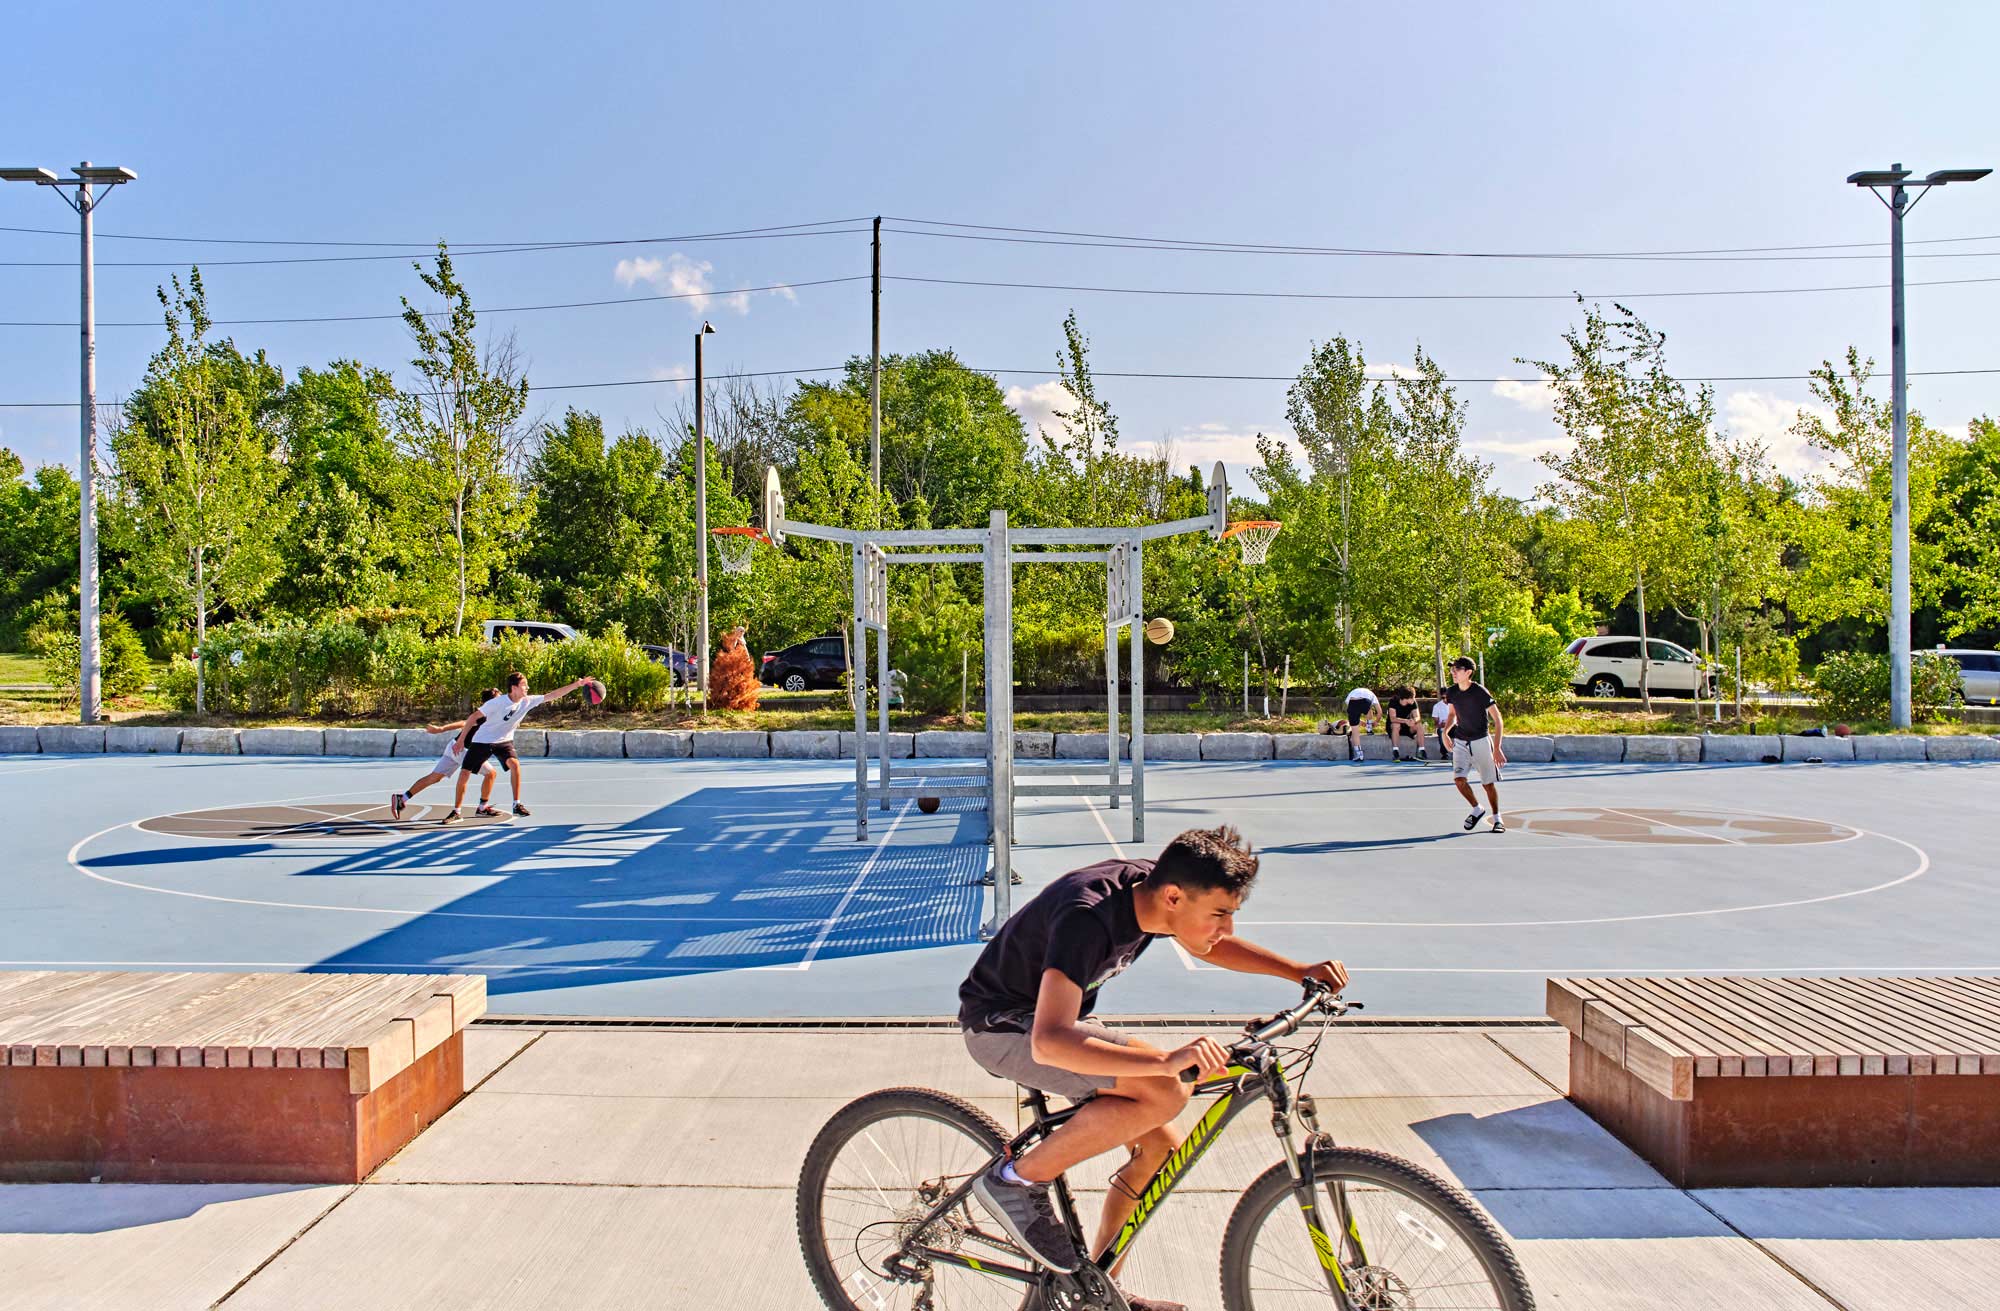 a person riding a bike on a basketball court.